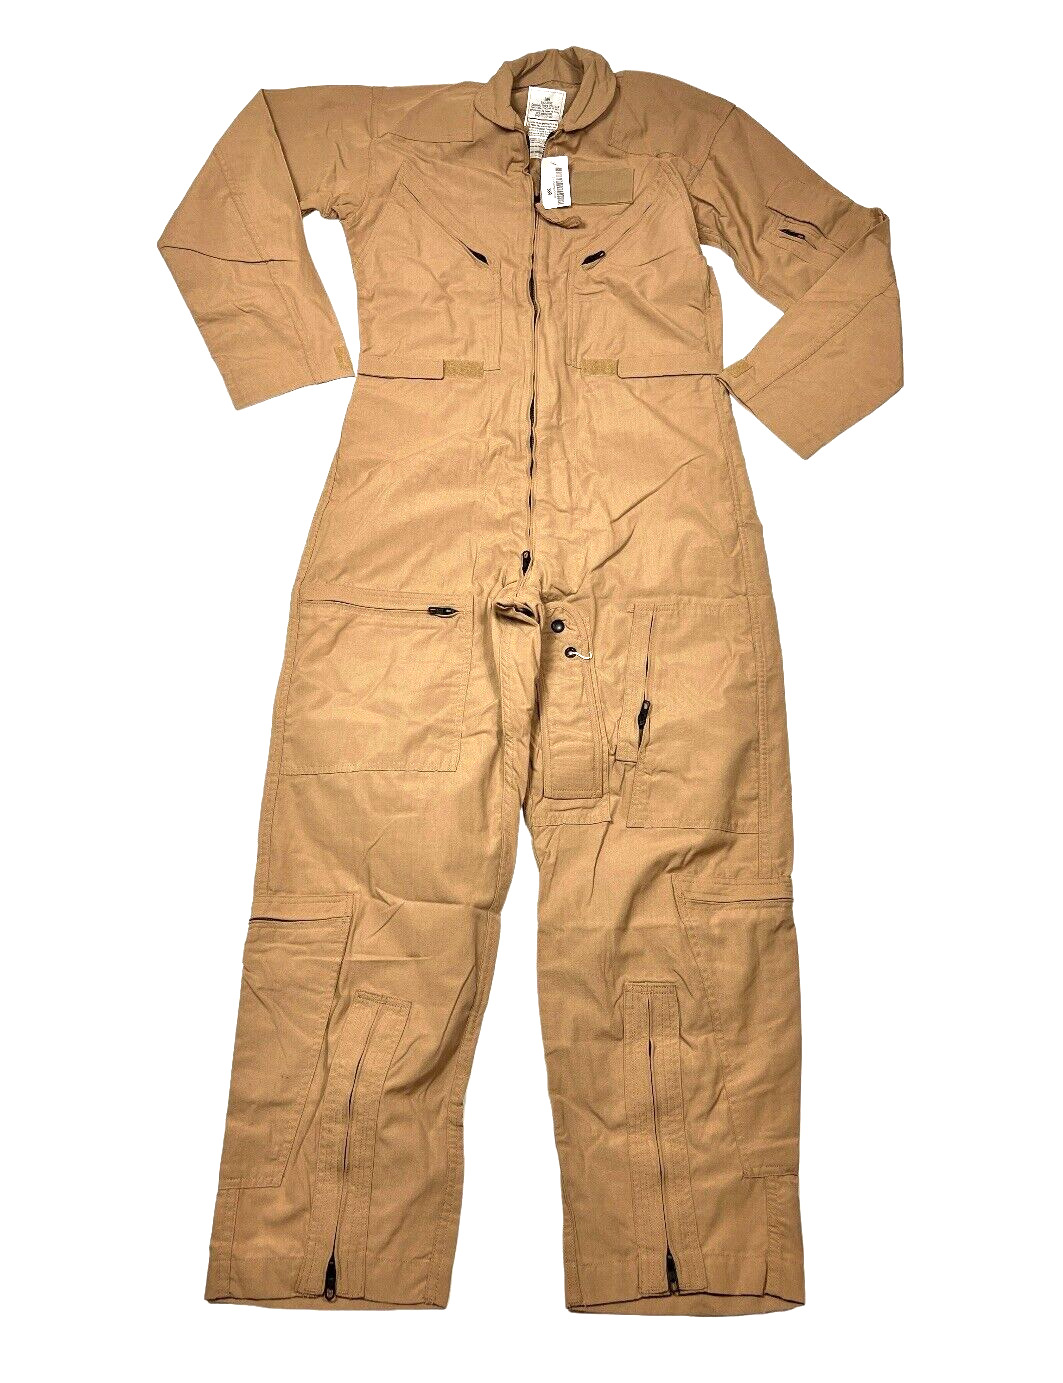 Vintage Military Flight Suit Coveralls Flyers Fighter Sage Beige USA Size 38X30